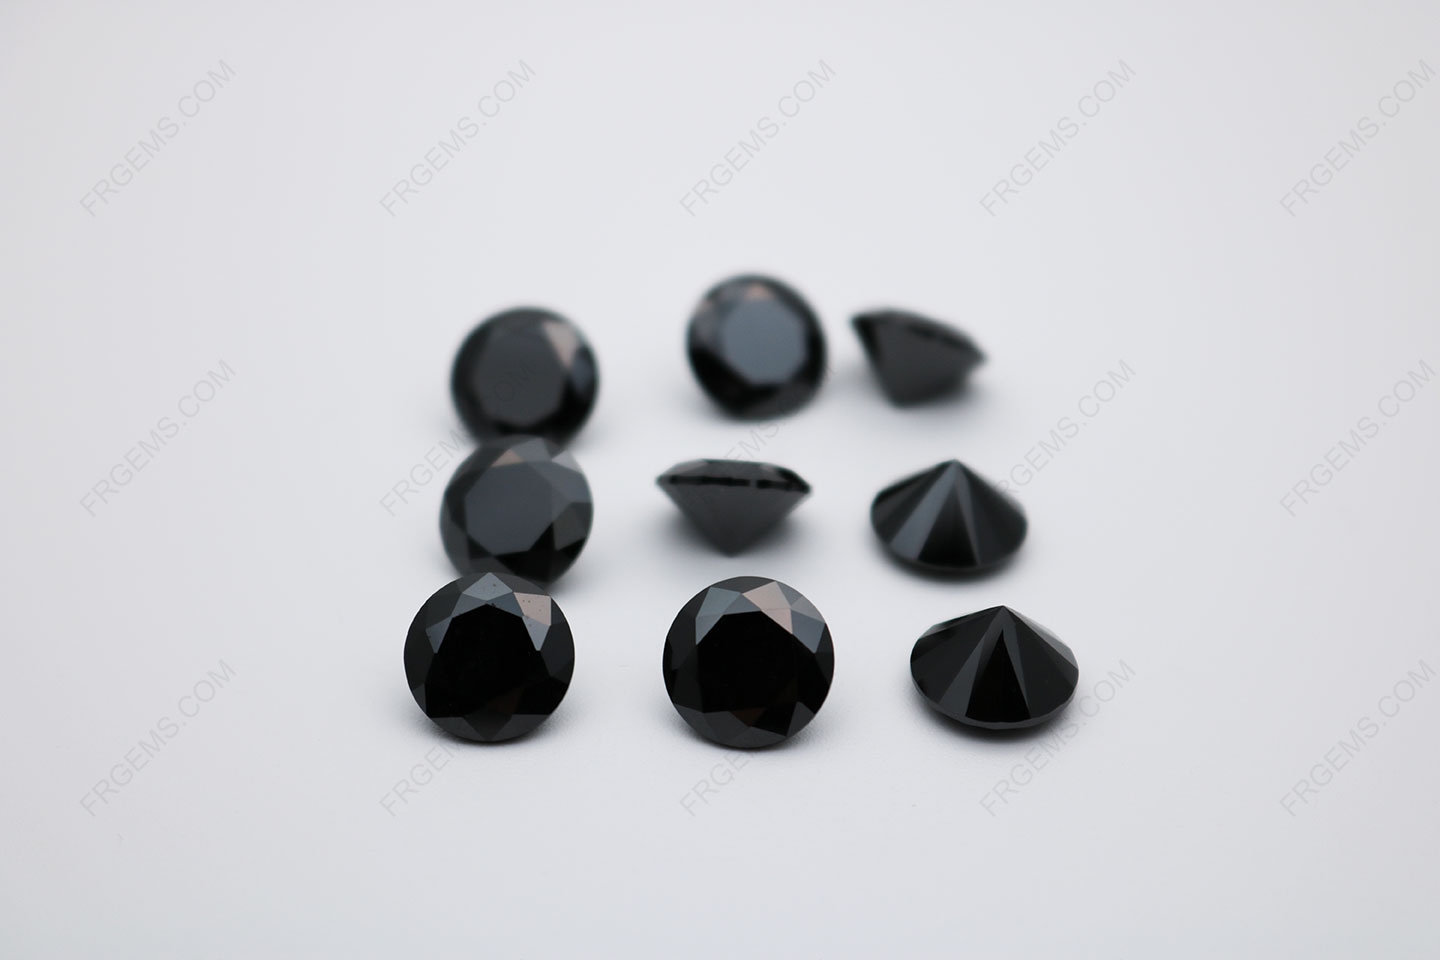 Cubic Zirconia Black Color Round Shape faceted 10mm stones CZ02 IMG_0245